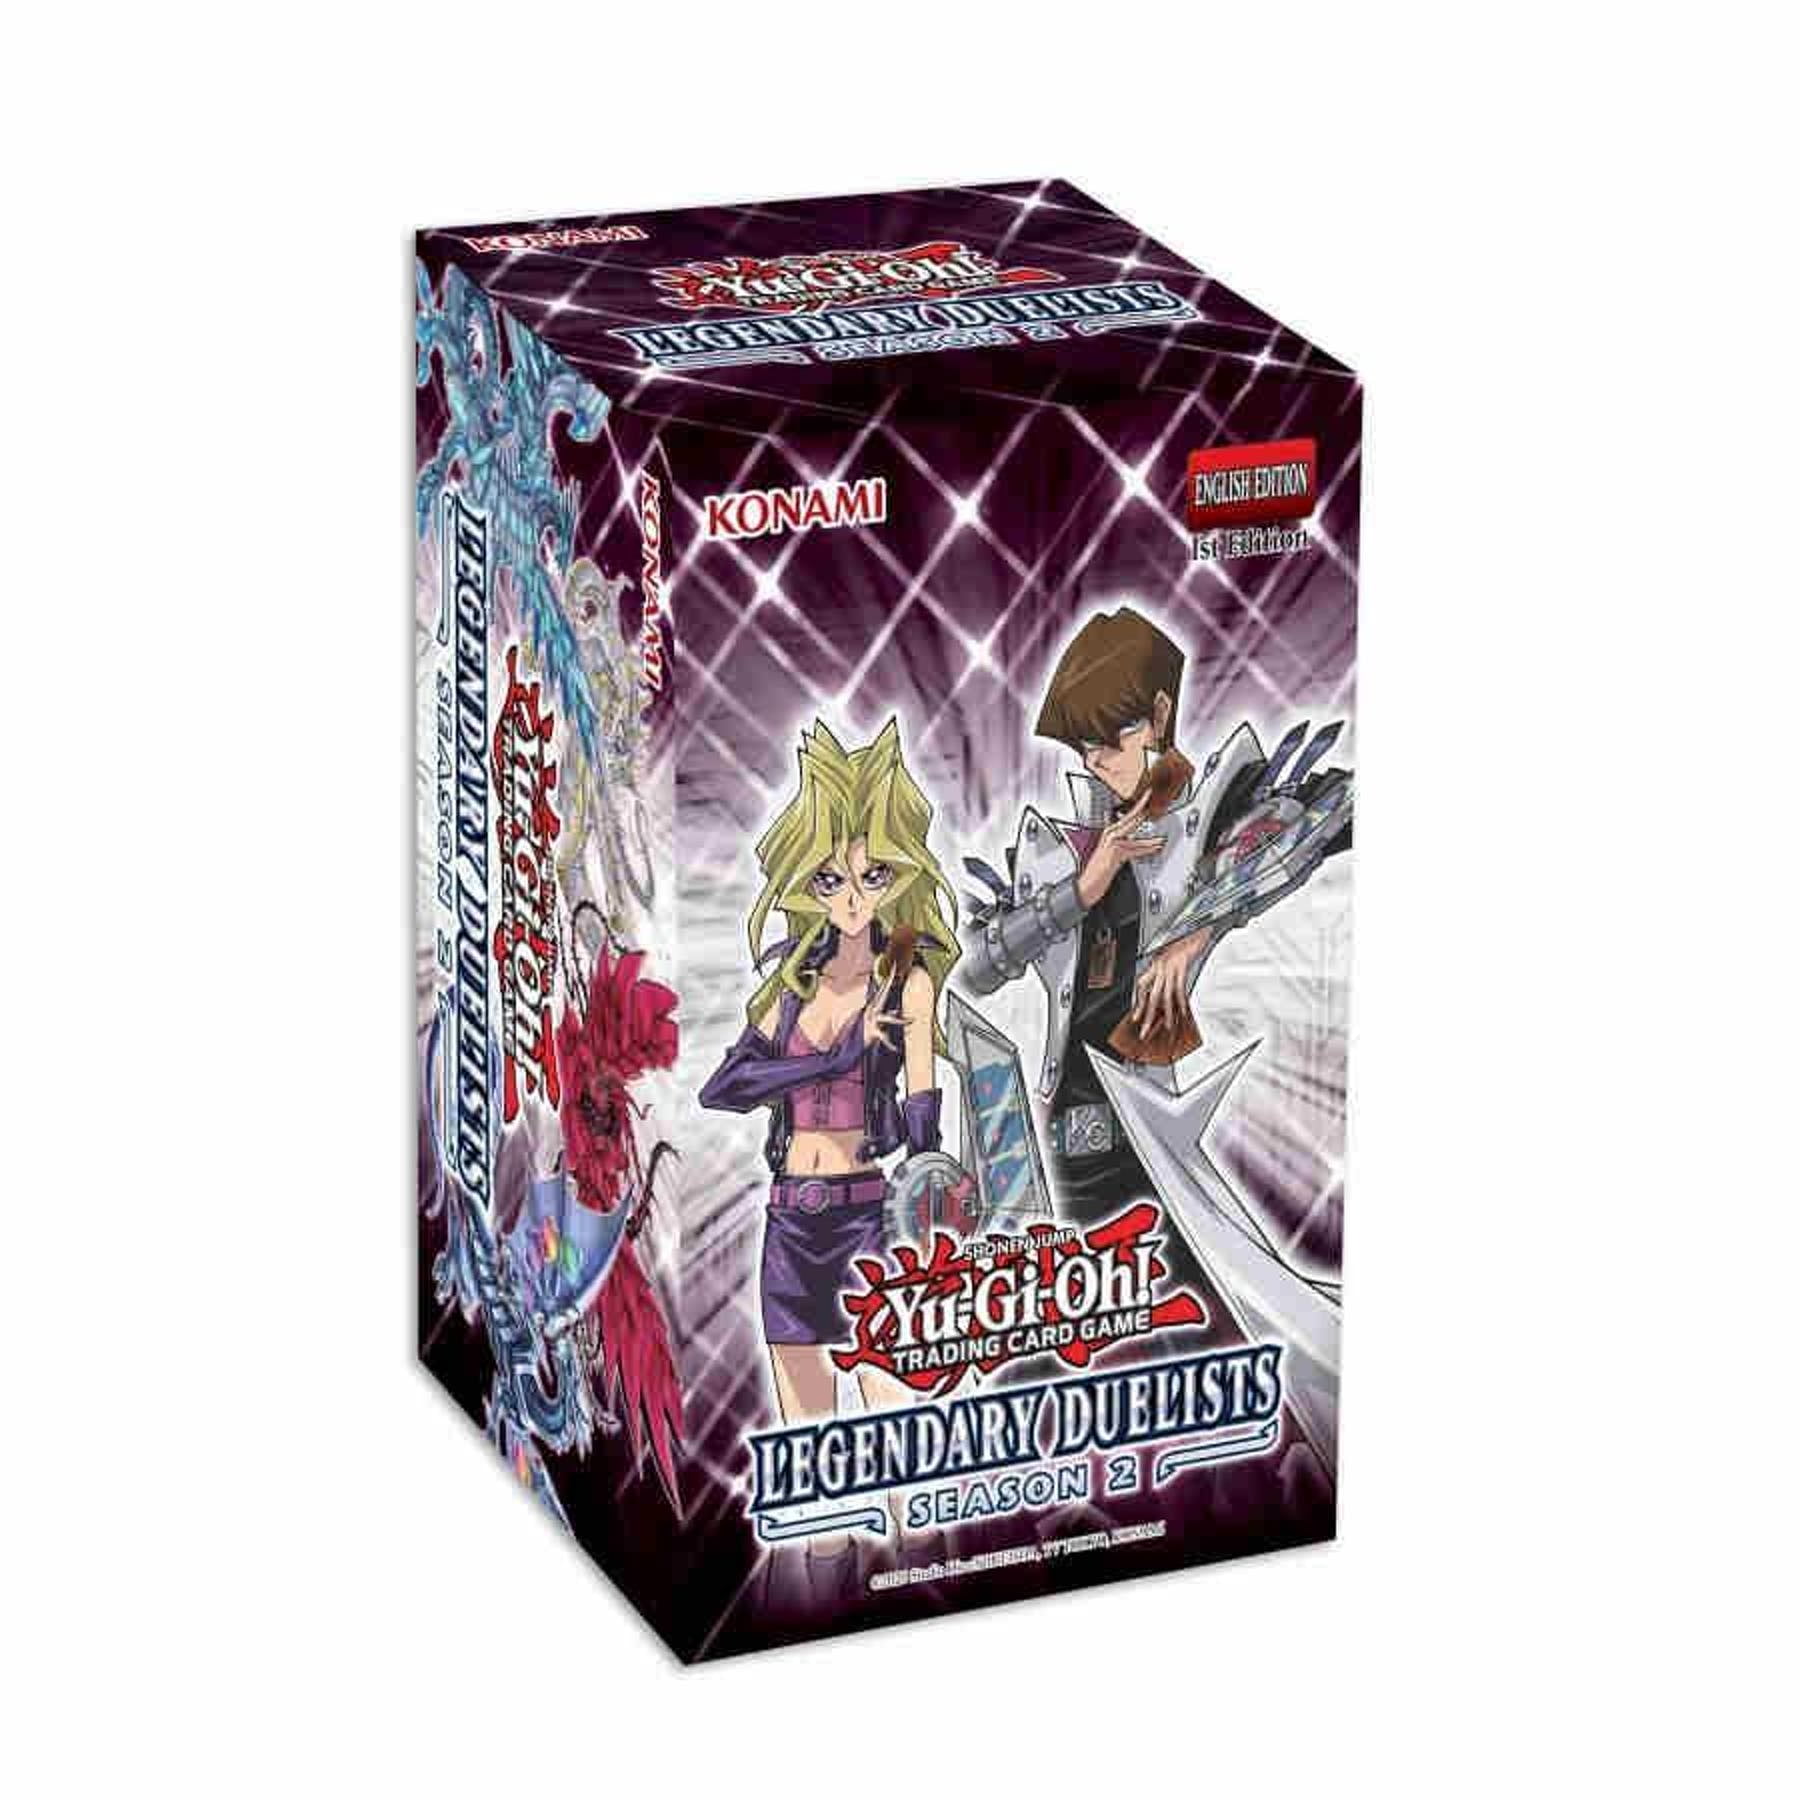 Konami Yugioh Legendary Duelists Sister of The Rose Trading Card Game 1st Editio for sale online 